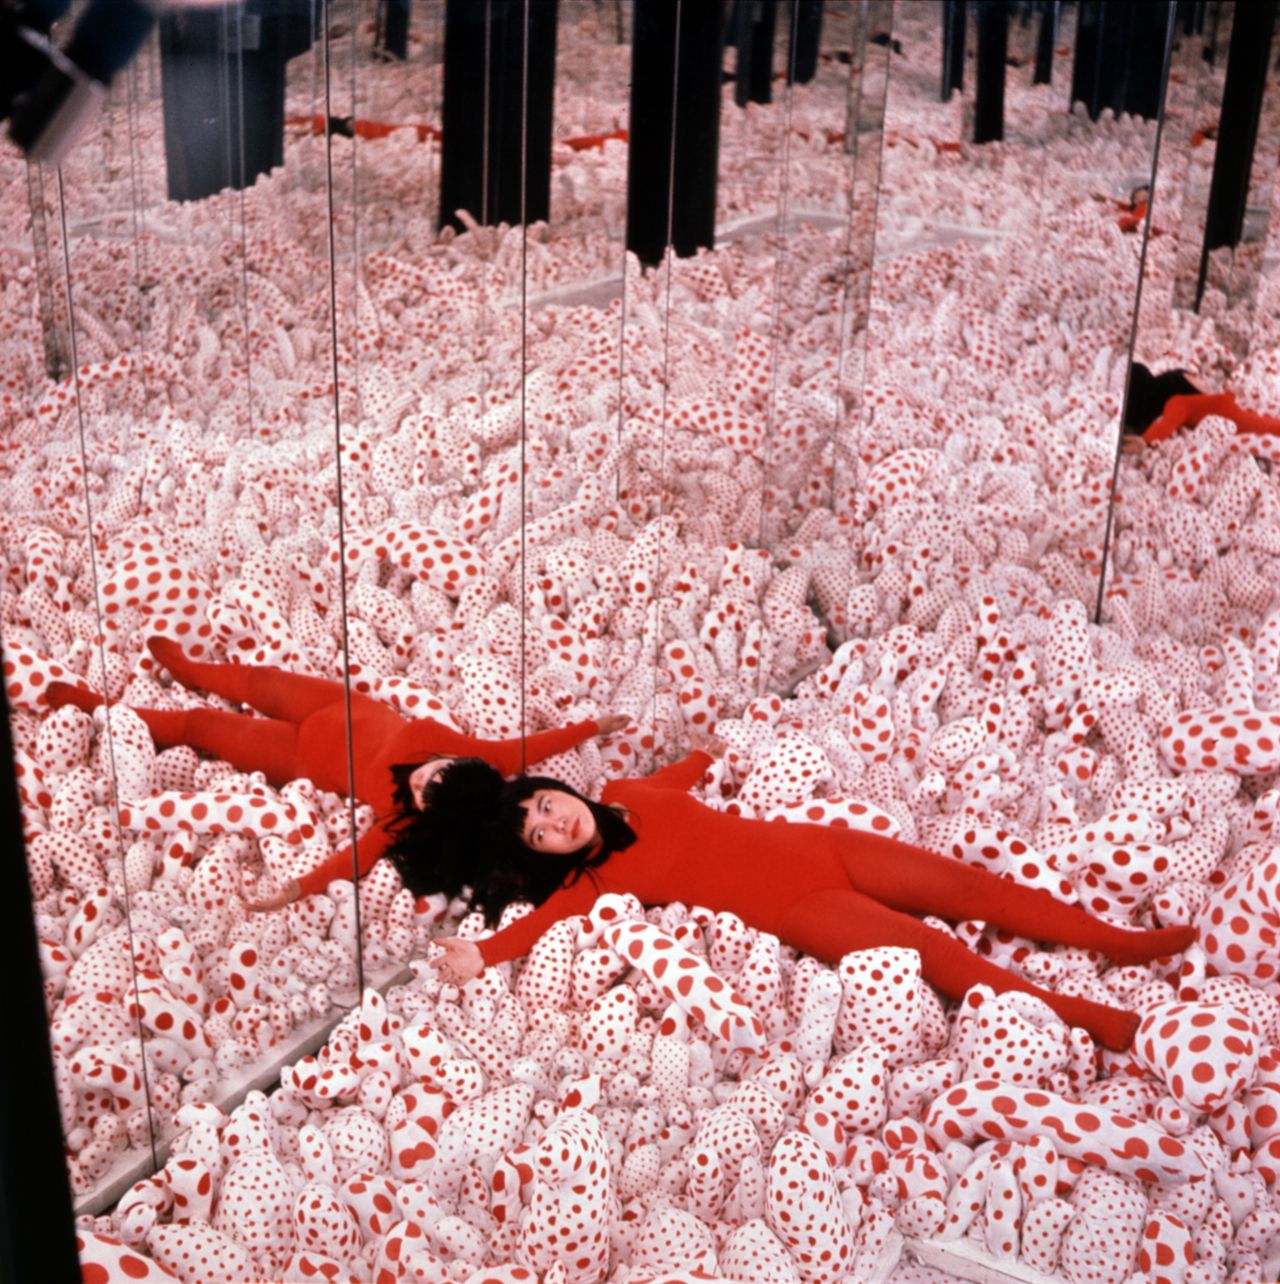 Yayoi Kusama in an installation view of "Infinity Mirror Room—Phalli’s Field,1965, in Floor Show," at Castellane Gallery, New York, in 1965.